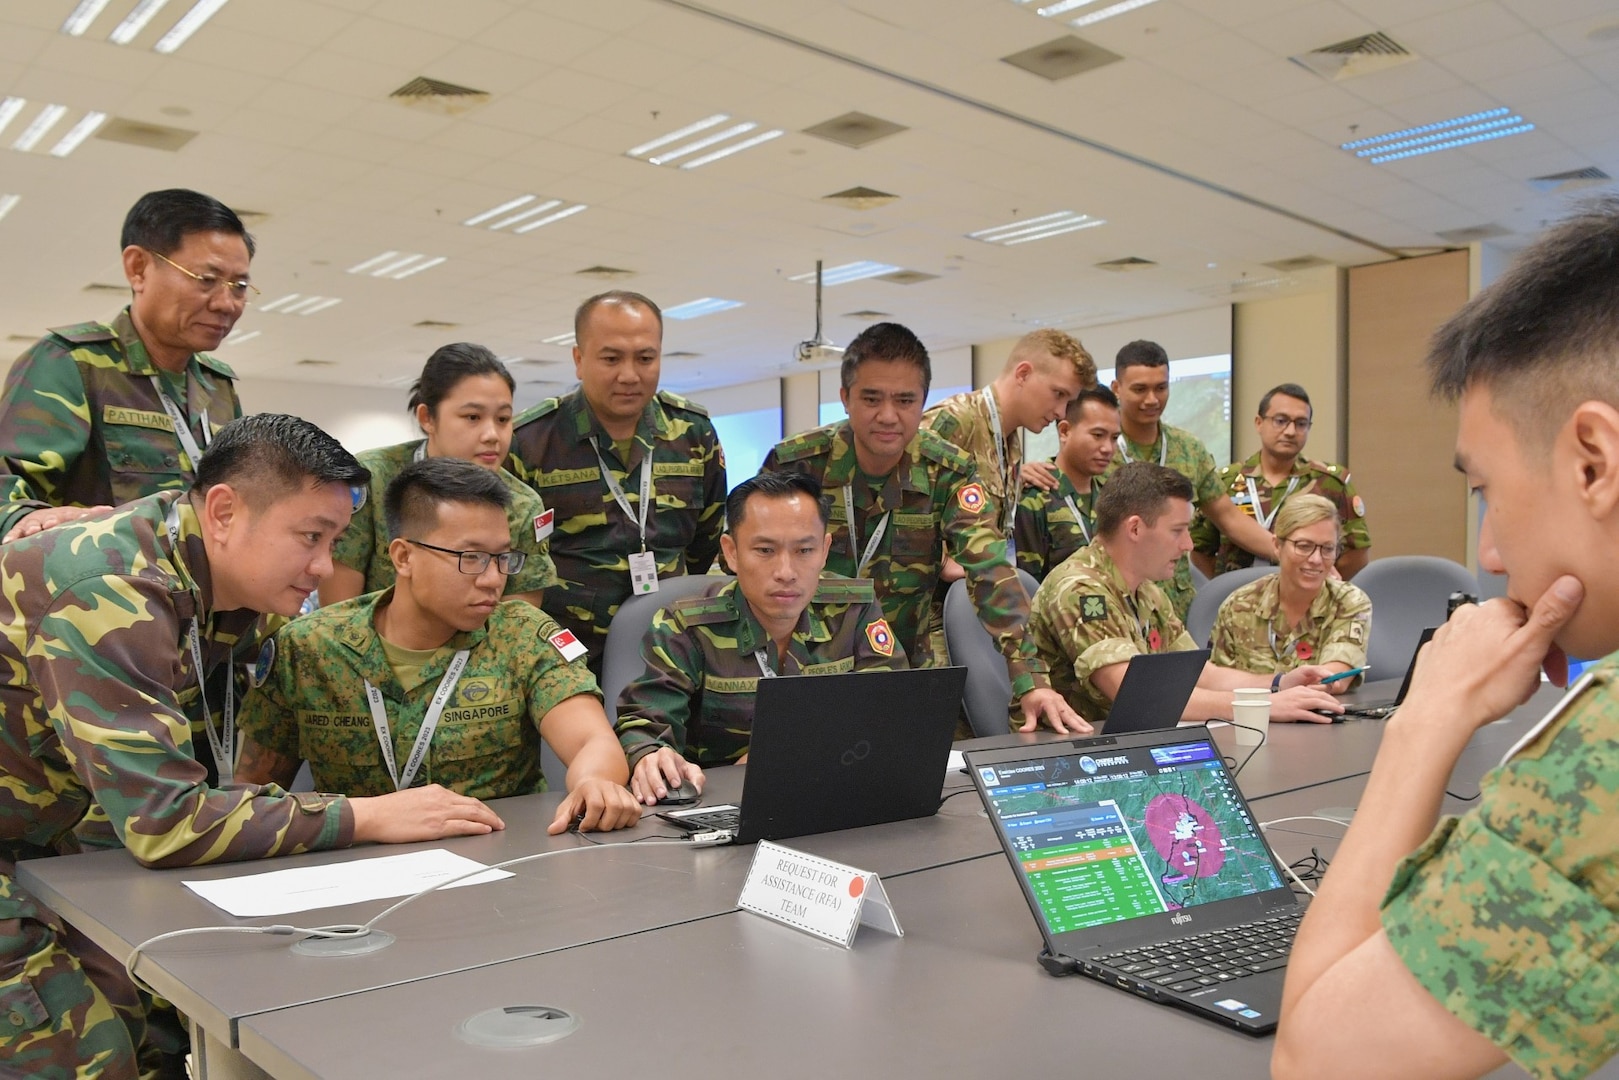 Military participants were actively engaged in a training session on the use of the Regional Humanitarian Assistance and Disaster Relief (HADR) Coordination Centre's (RHCC) OPERA Computer Information System (CIS).